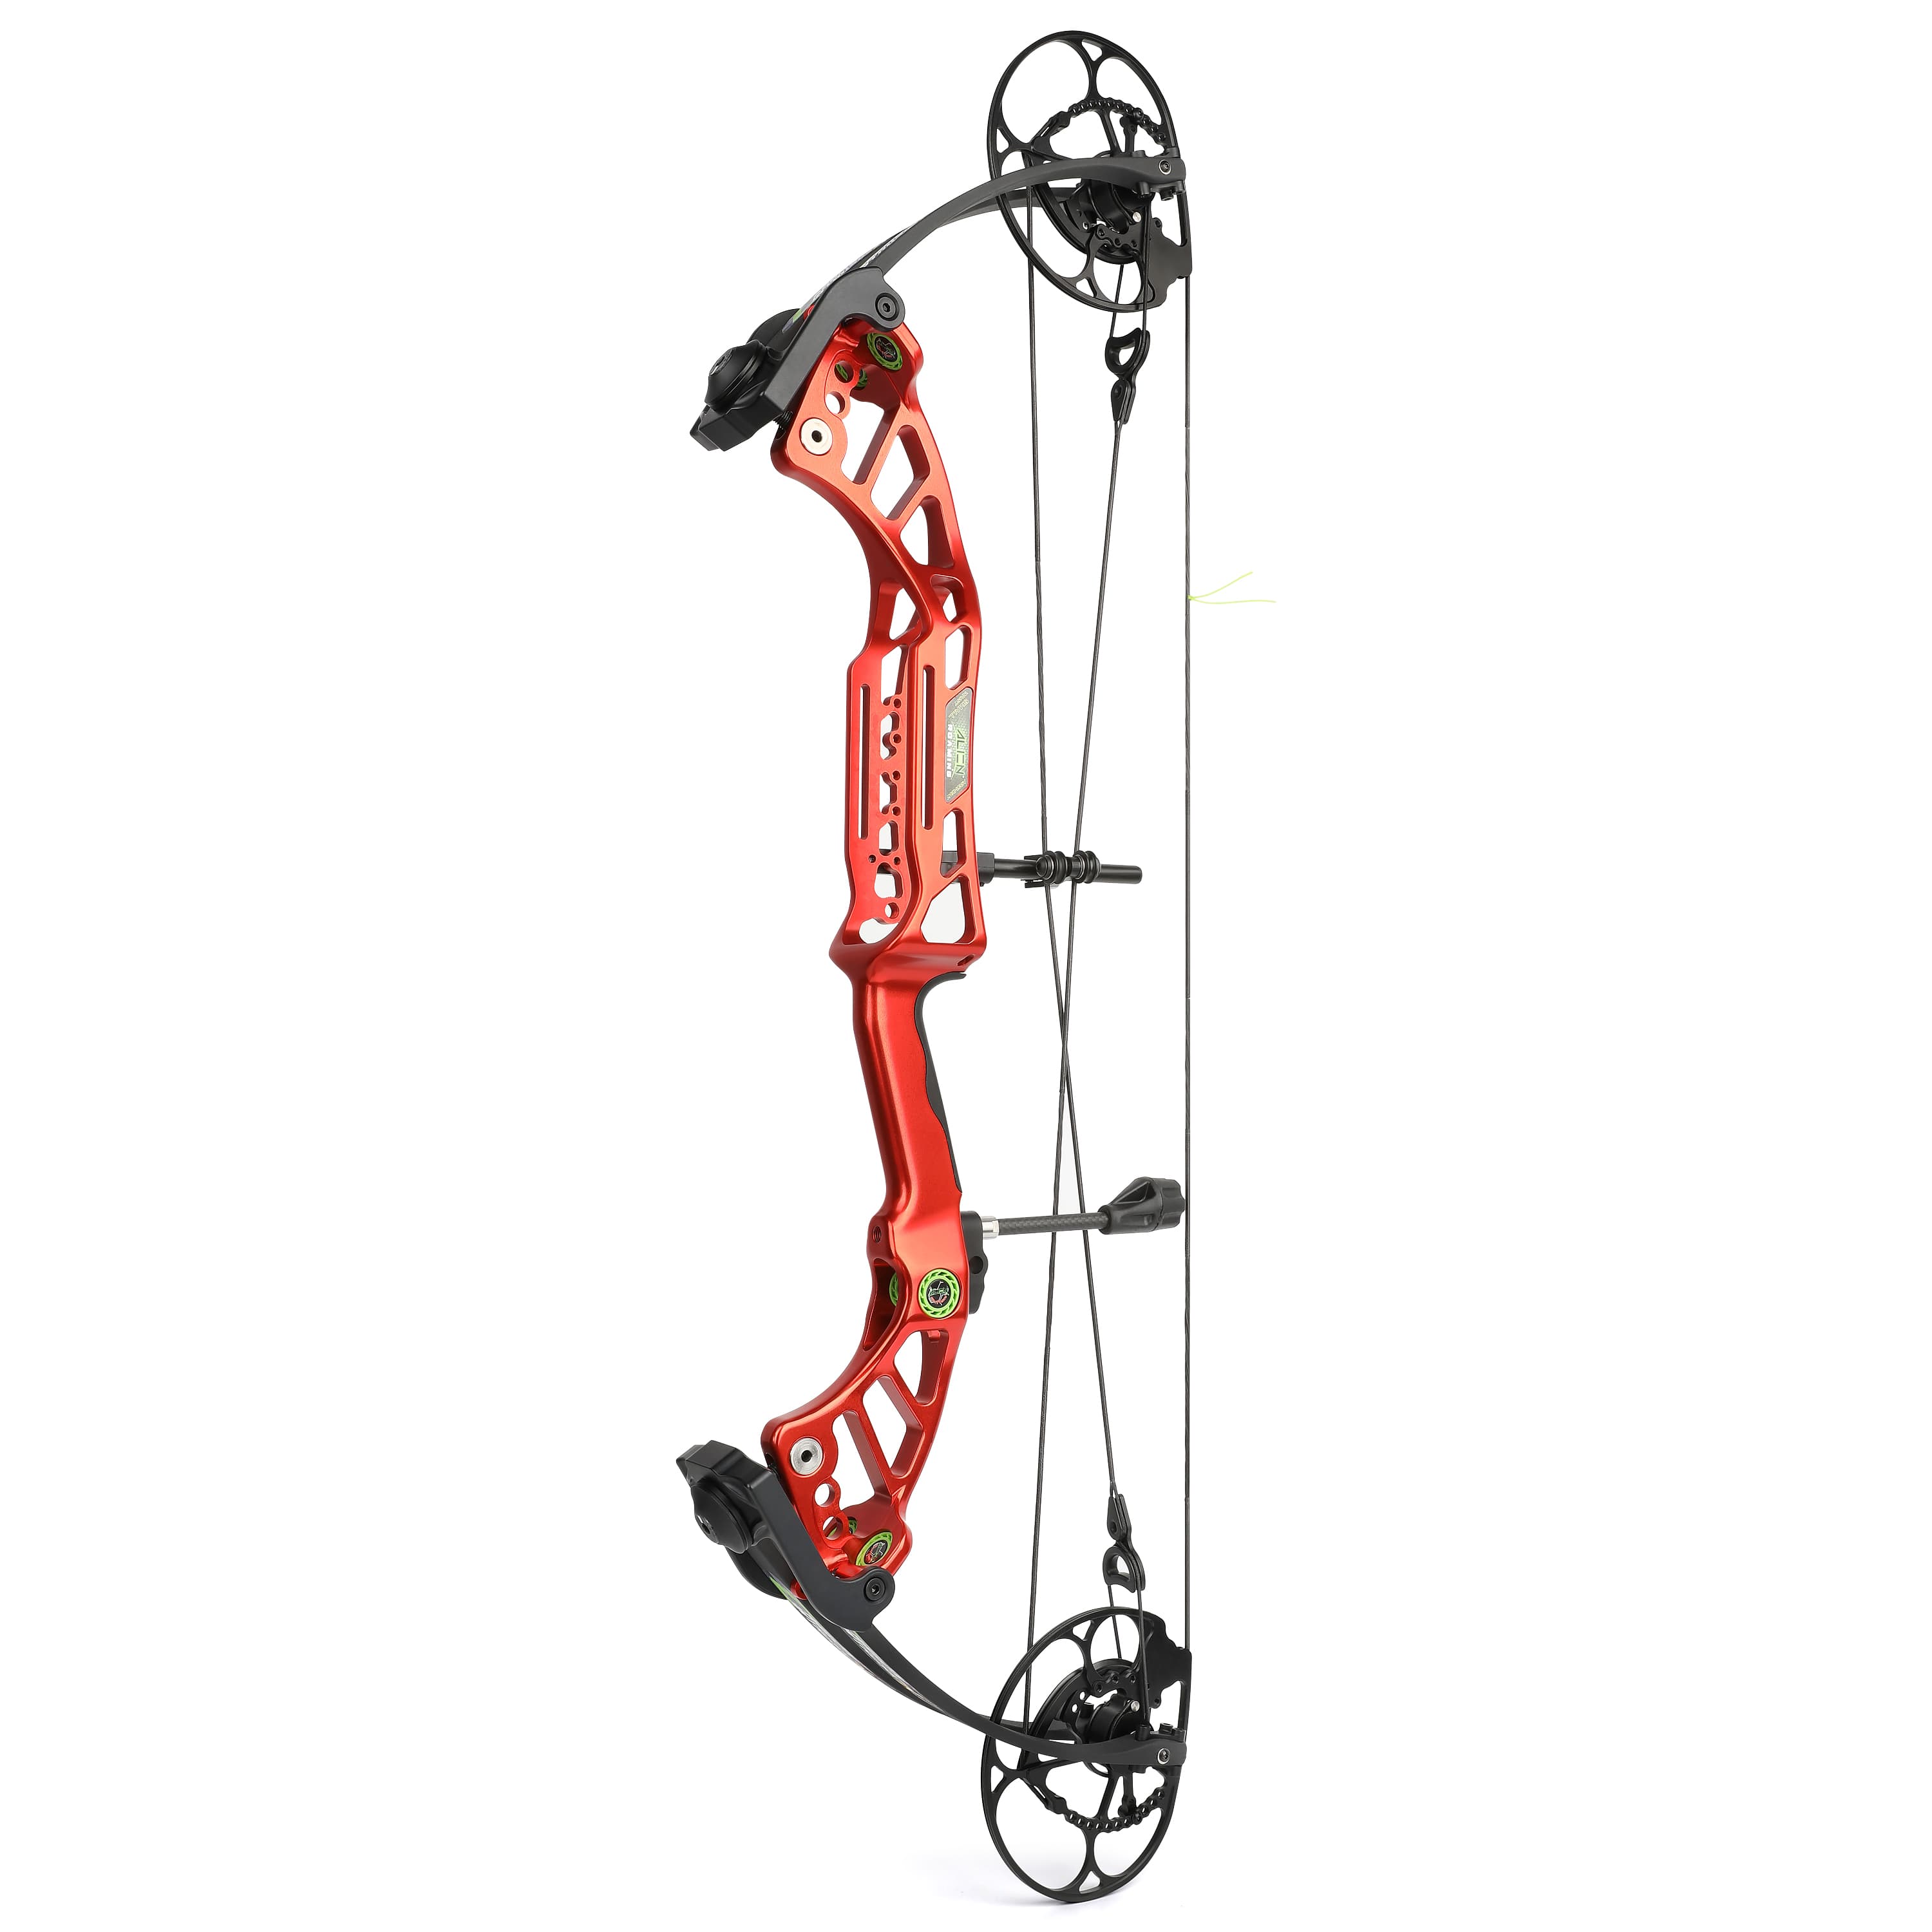 ALIEN CARBON INTRUSION Compound Hunting Bow, 29" / 350 FPS / 40-75#-CHN Archery